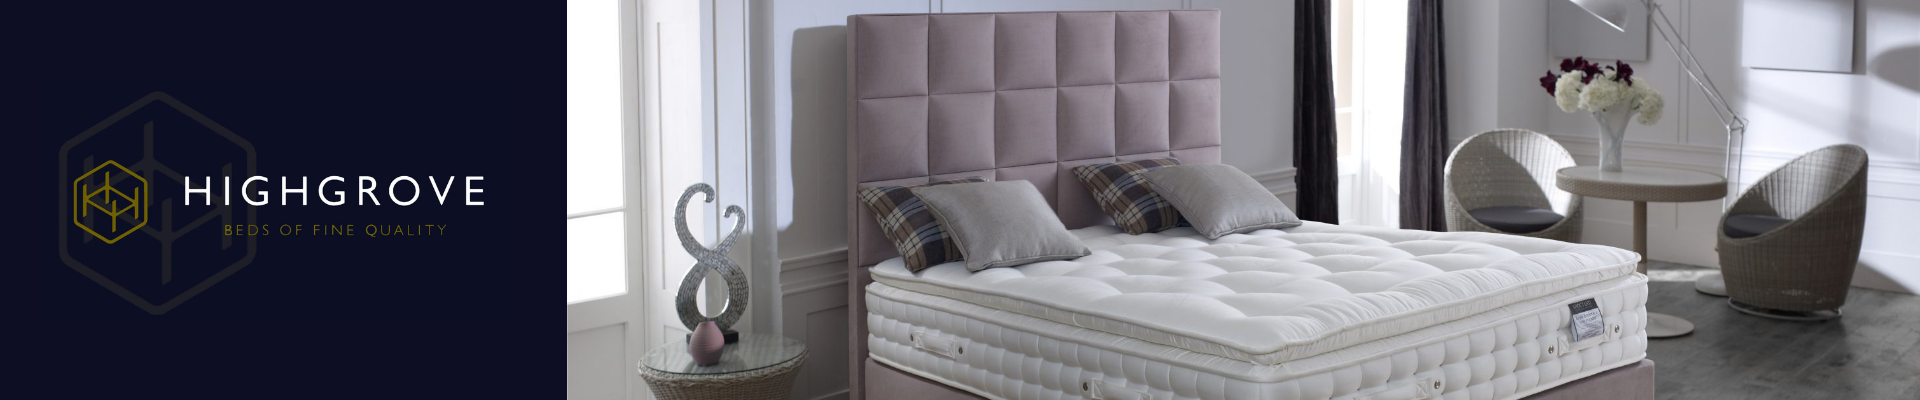 Highgrove Headboards Collections Banner 